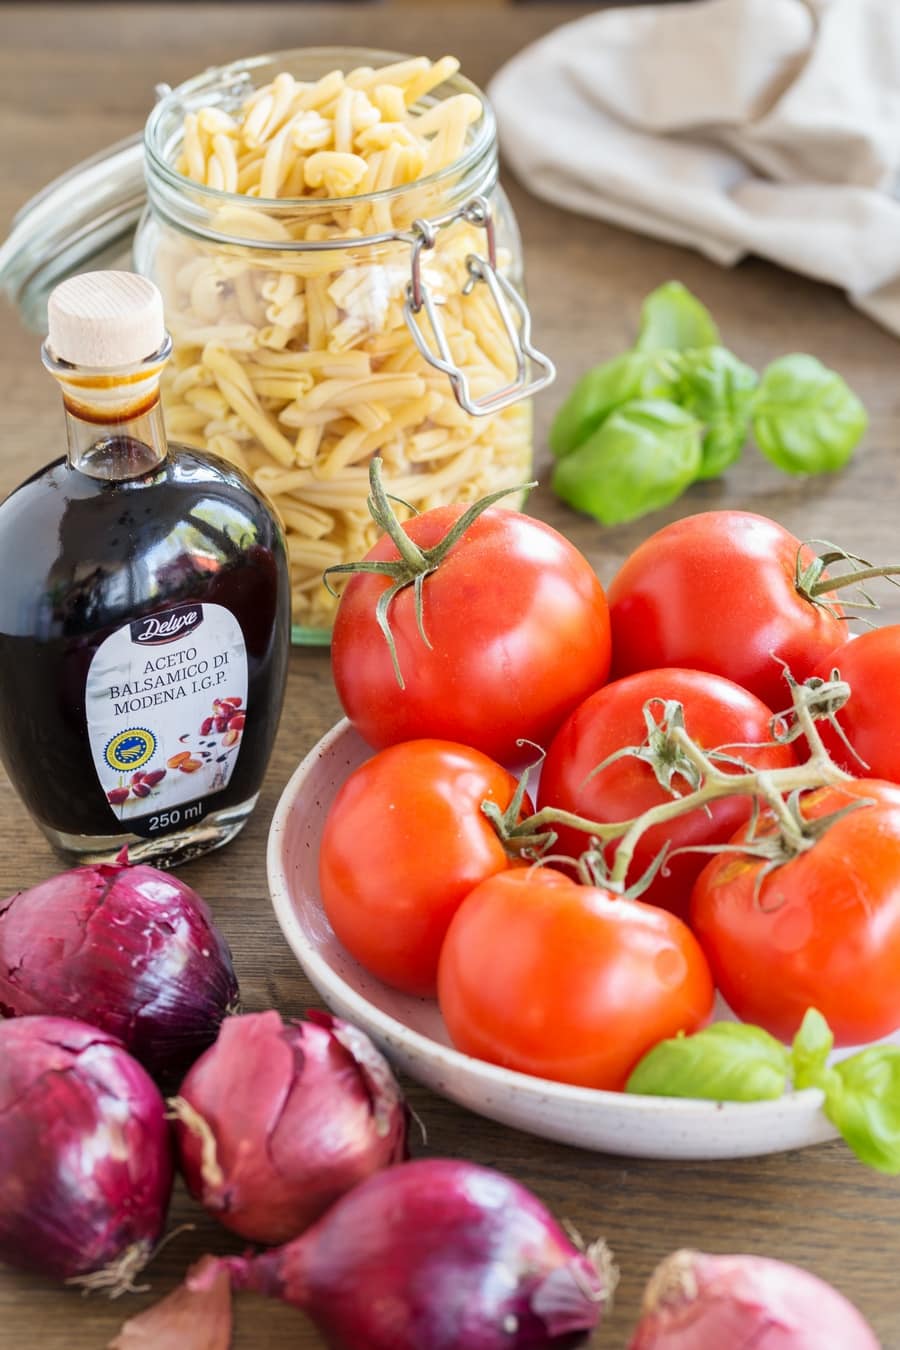 Ripe tomatos in a bowl, red onions around it, a bottle of balsamico vinegar and strozzapreti pasta in a jar.